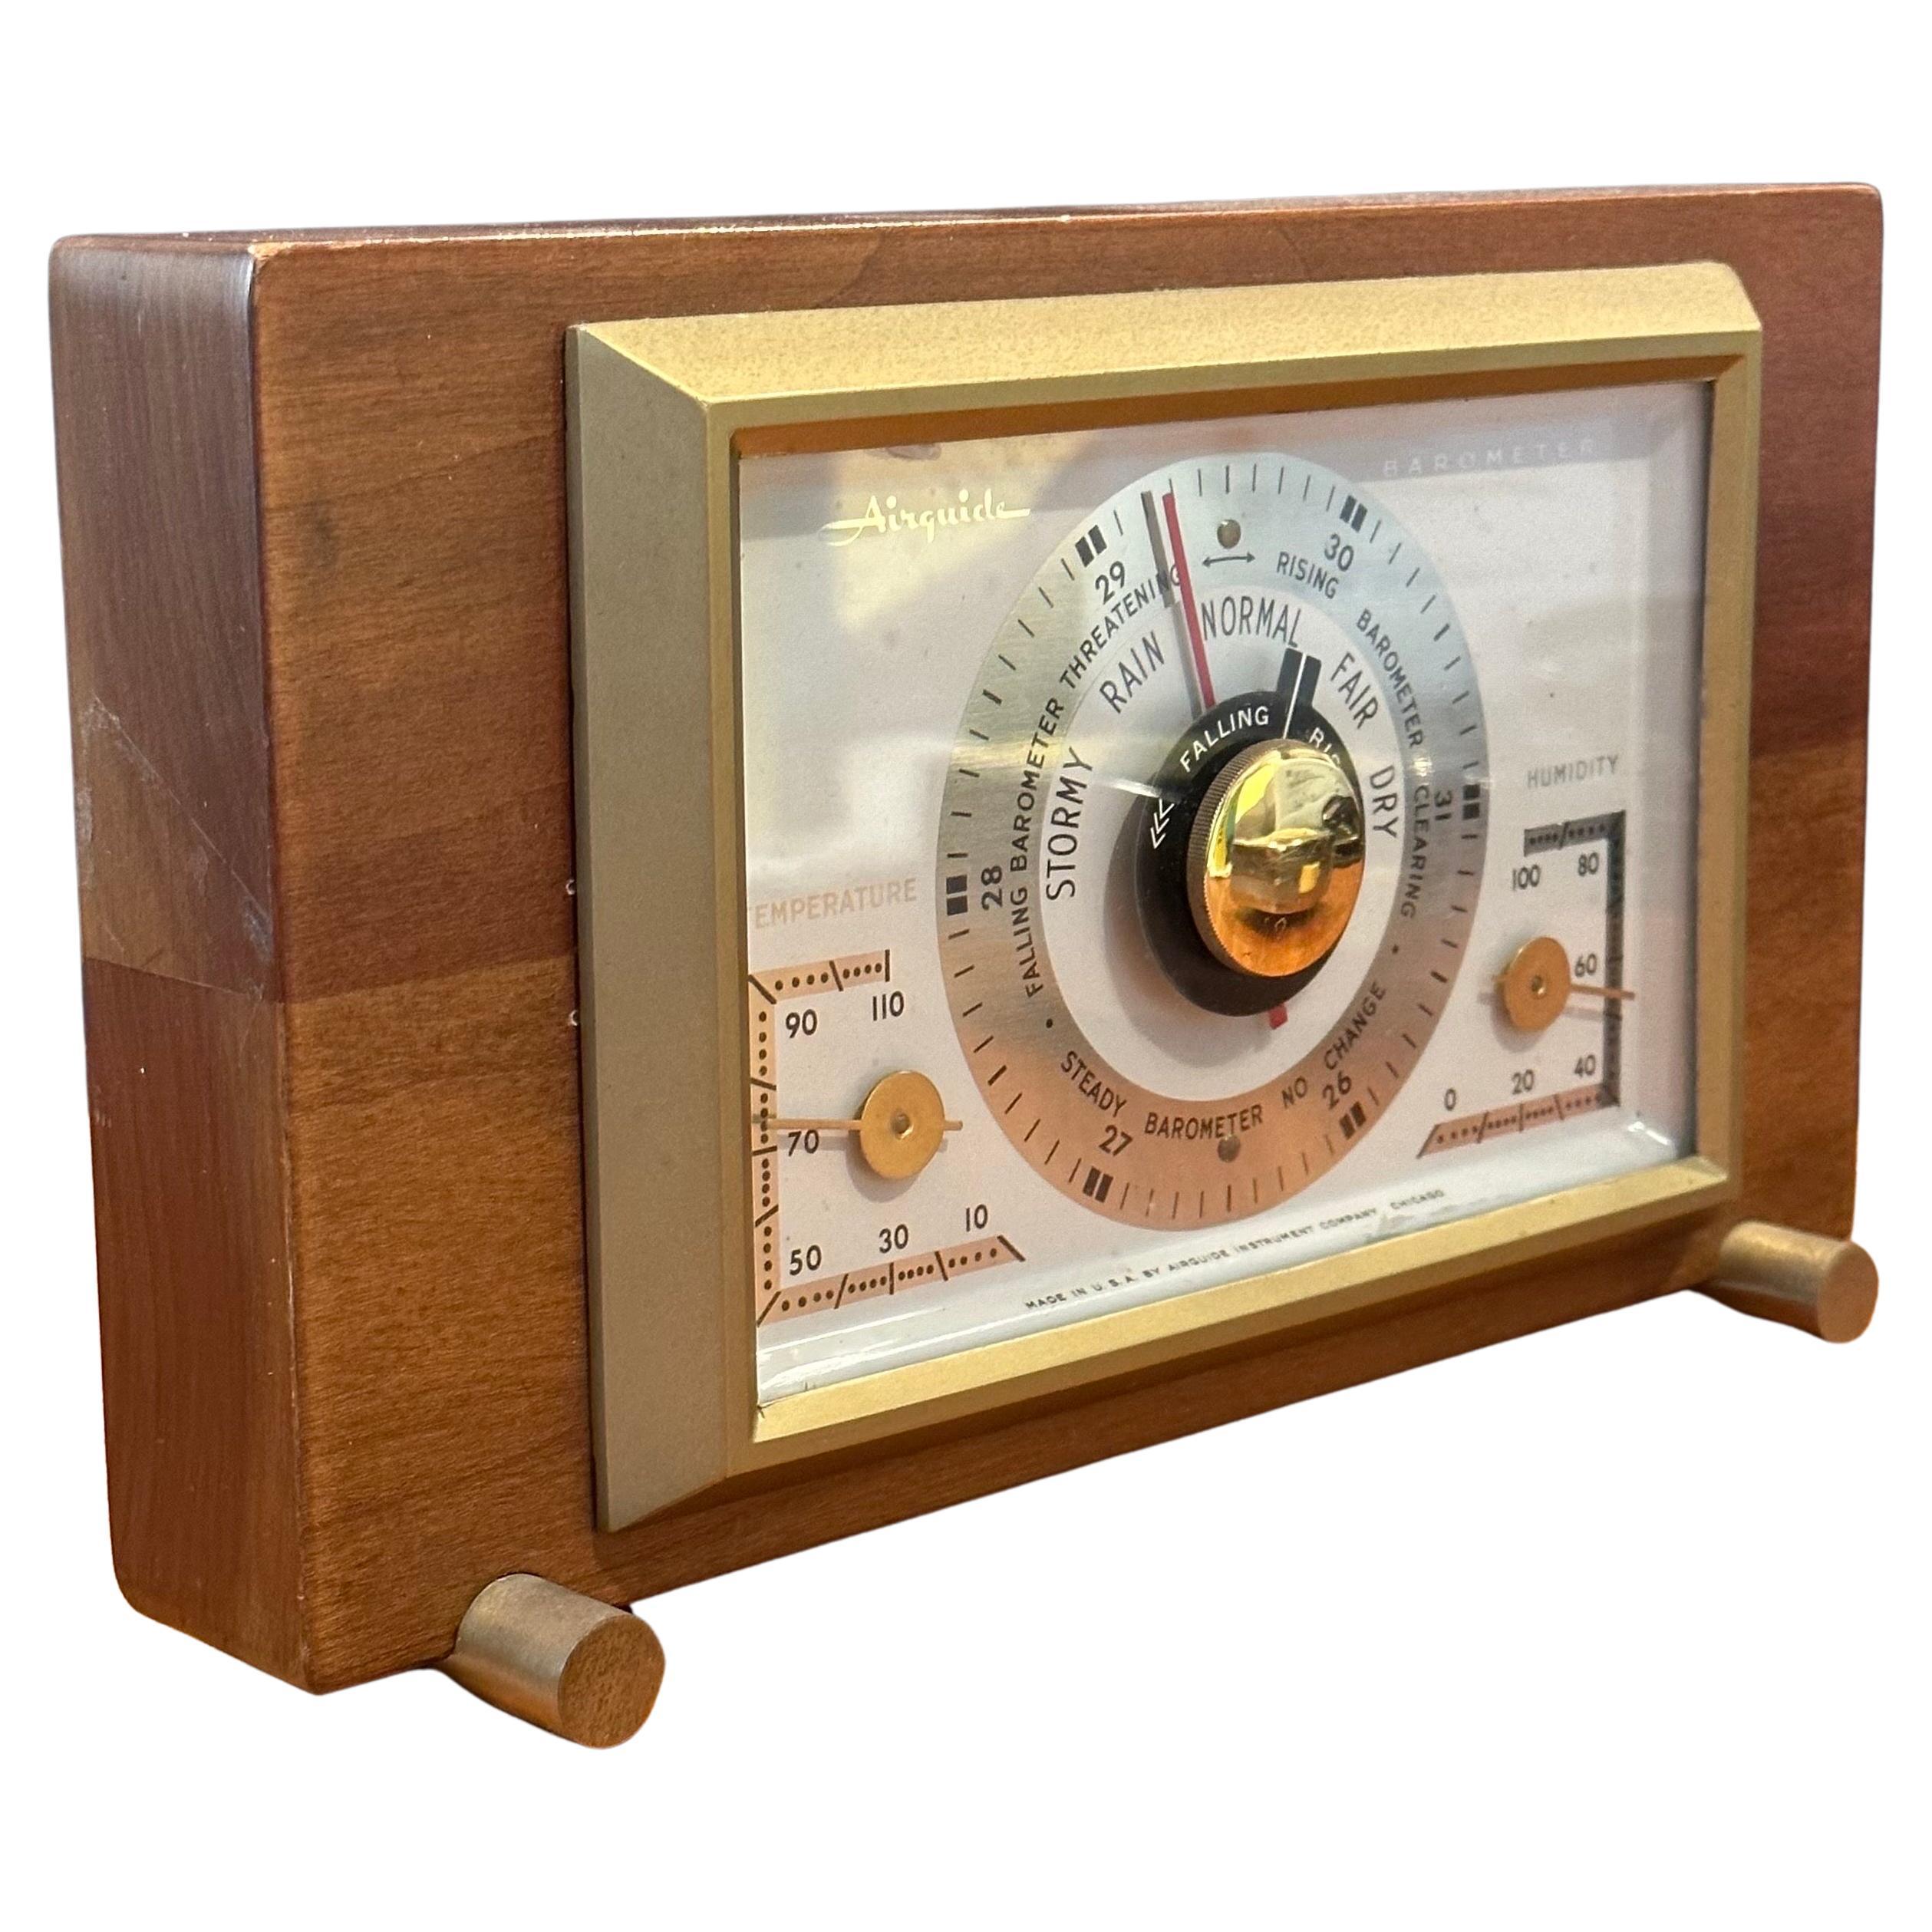 A very cool desktop barometer / weather station by Airguide Instrument Company, circa 1950s.  The device is packaged in a walnut case with brass feet and accents.  It has gauges and instuments to let you know the current temperature, humidity and